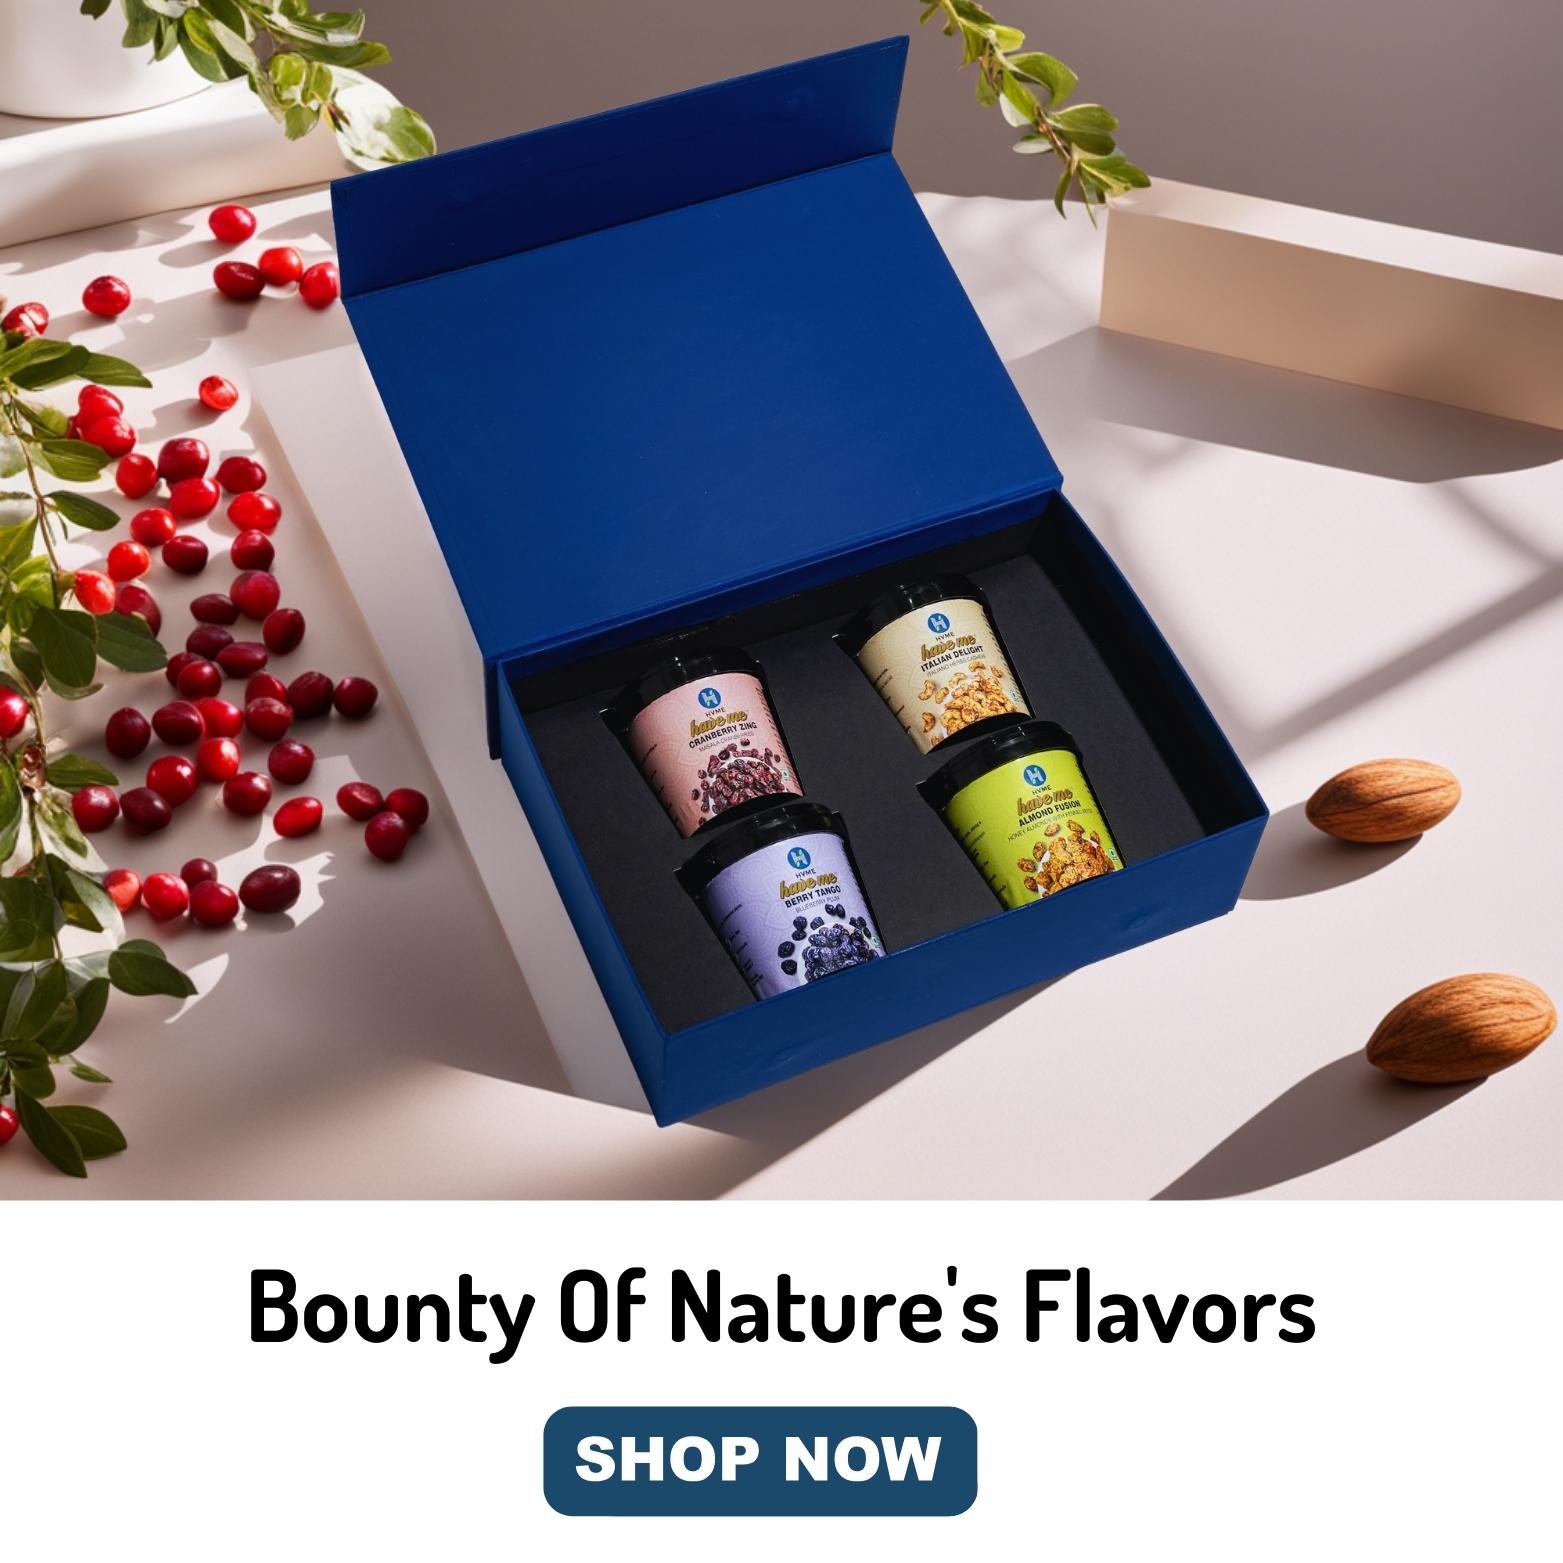 Bounty Of Nature's Flavors